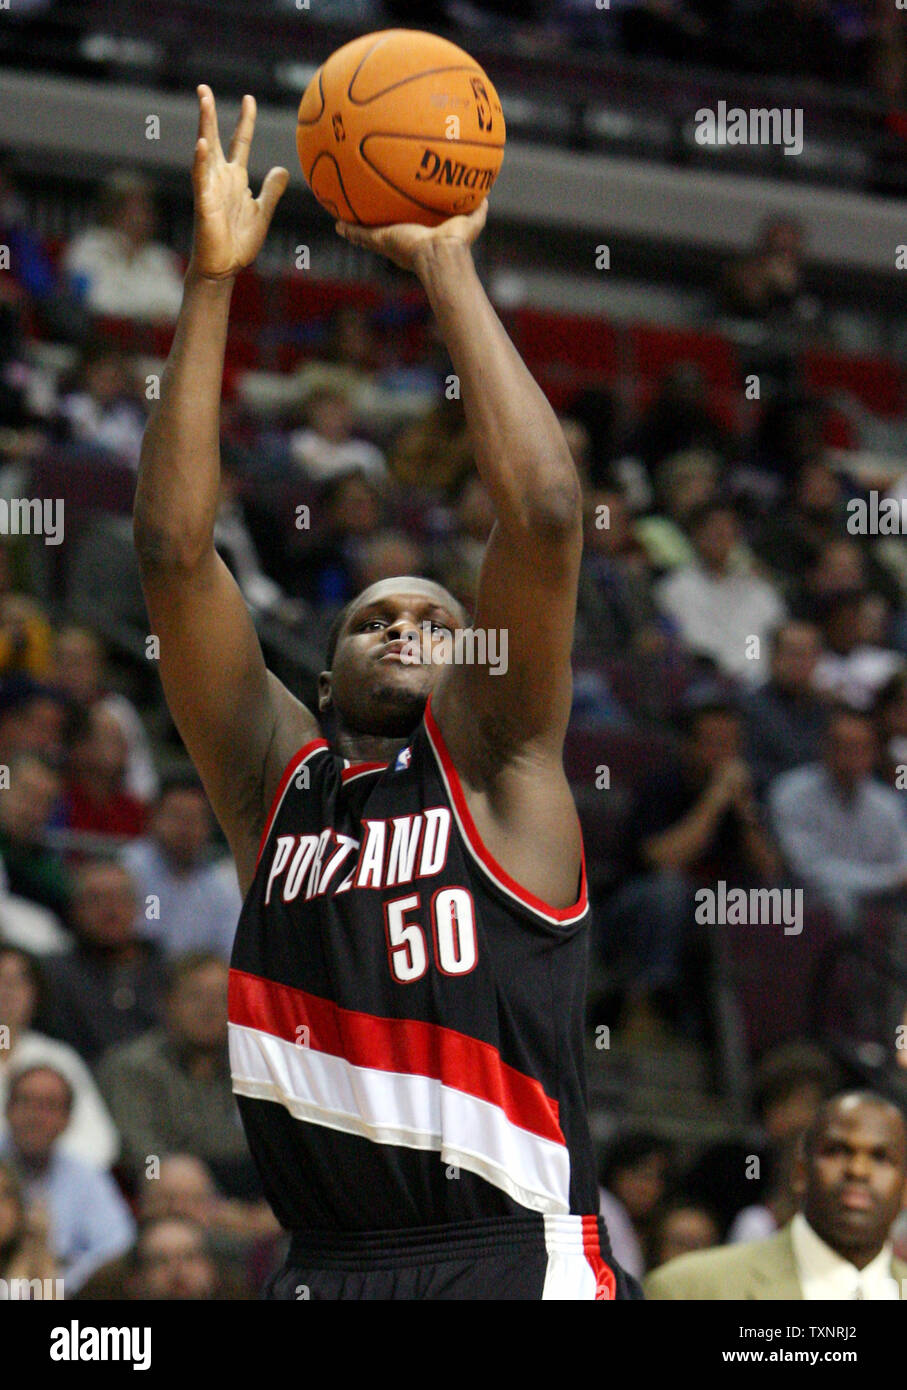 Portland Trail Blazers forward Zach Randolph (50) makes a long two-point shot in the fourth quarter against the Detroit Pistons at The Palace of Auburn Hills in Auburn Hills, Michigan on December 5, 2006.  Randolph scored 31 points in the Trail Blazers' 88-85 victory over the Pistons.  (UPI Photo/Scott R. Galvin) Stock Photo